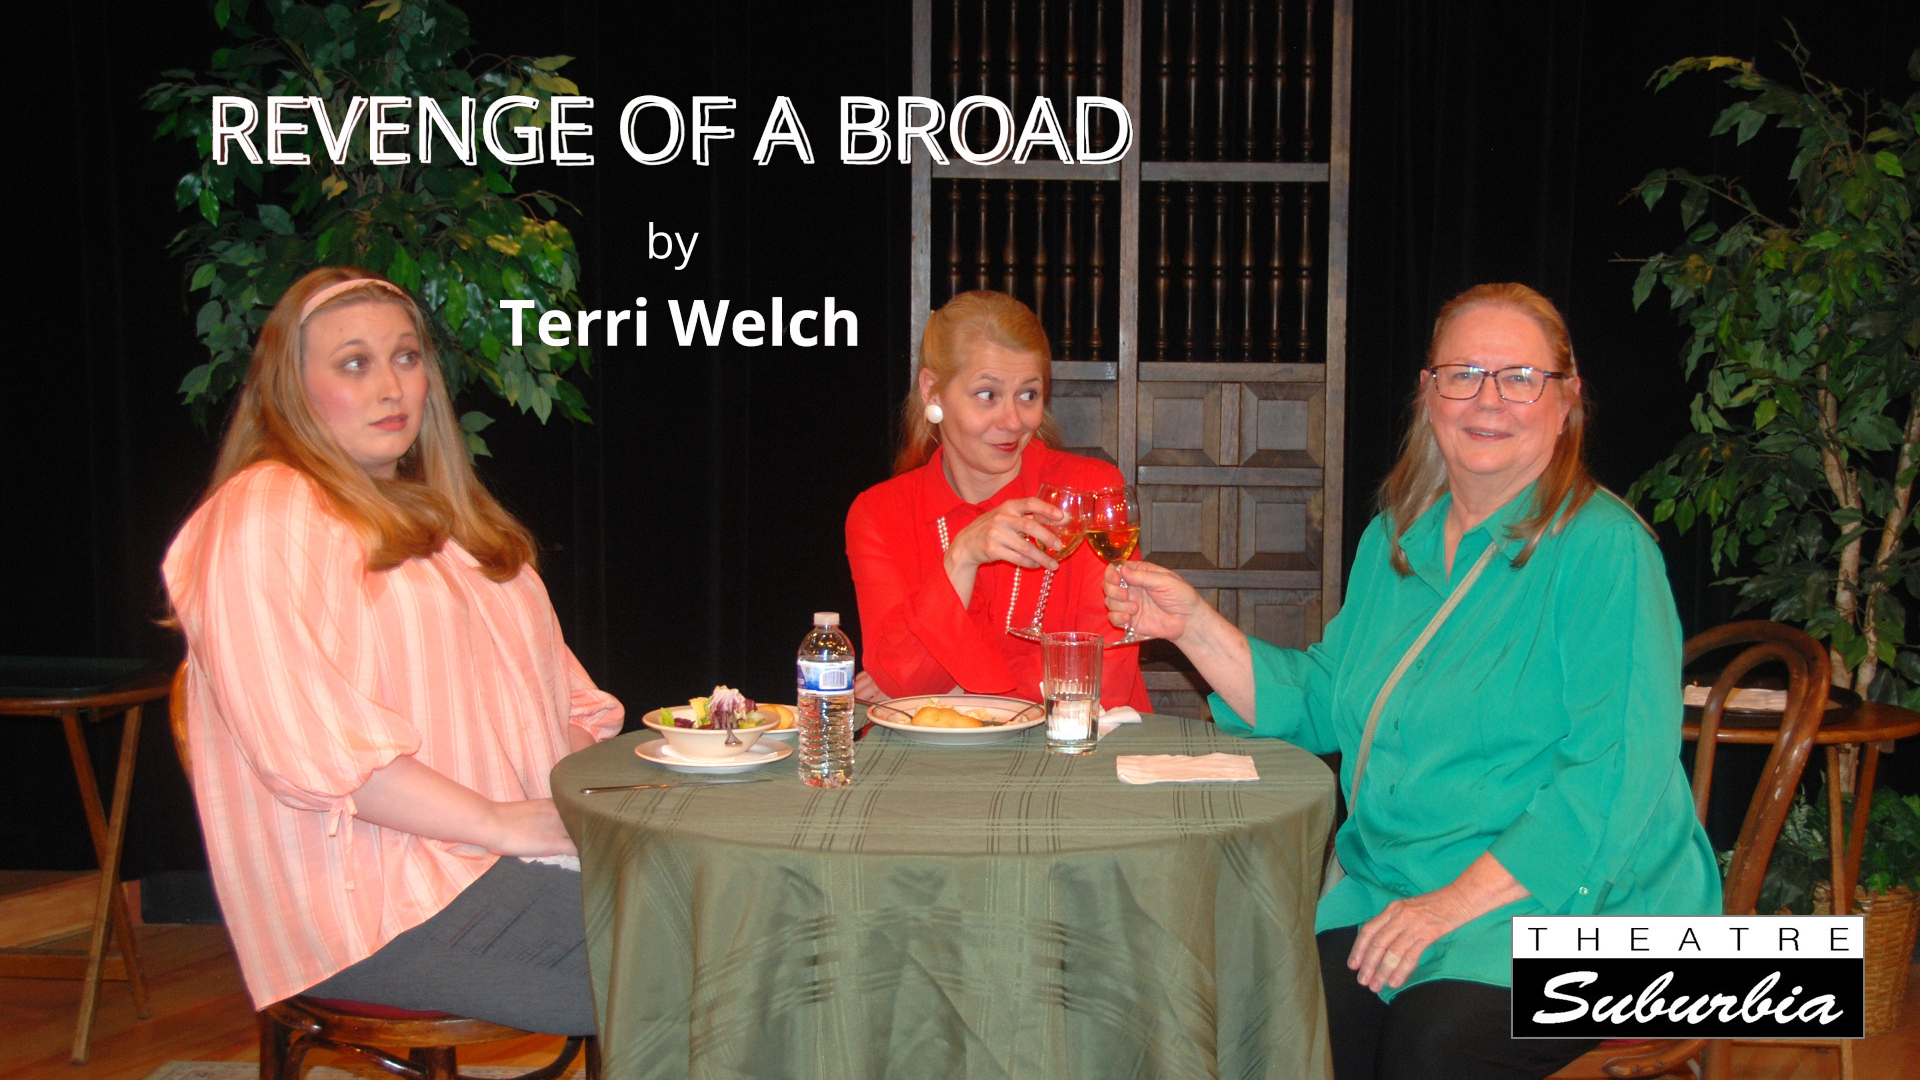 Revenge of a Broad by Terri Welch